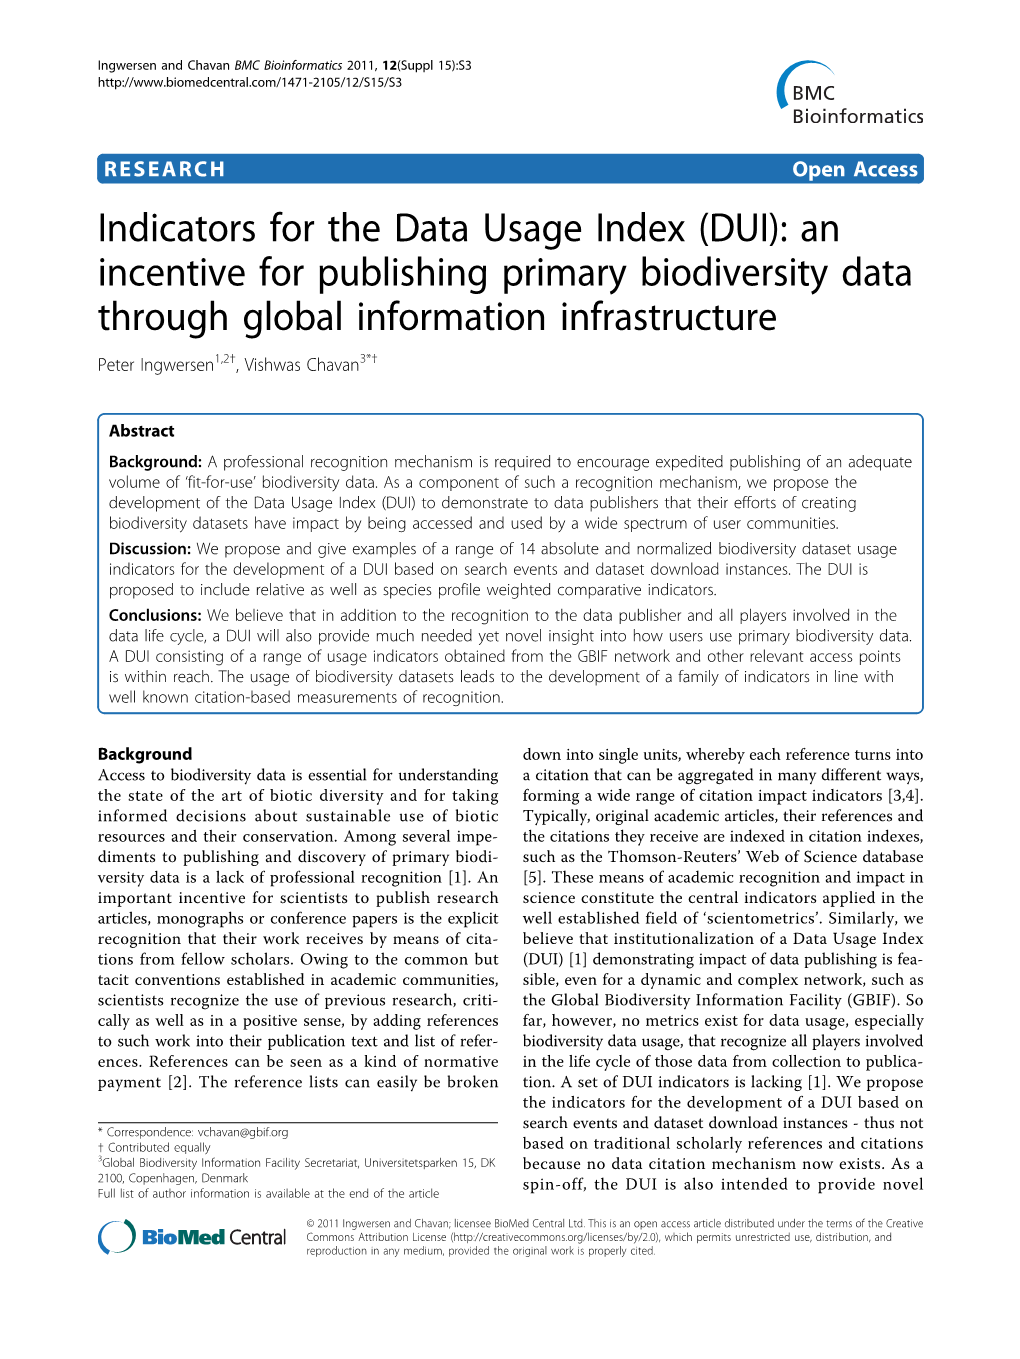 Indicators for the Data Usage Index (DUI): An